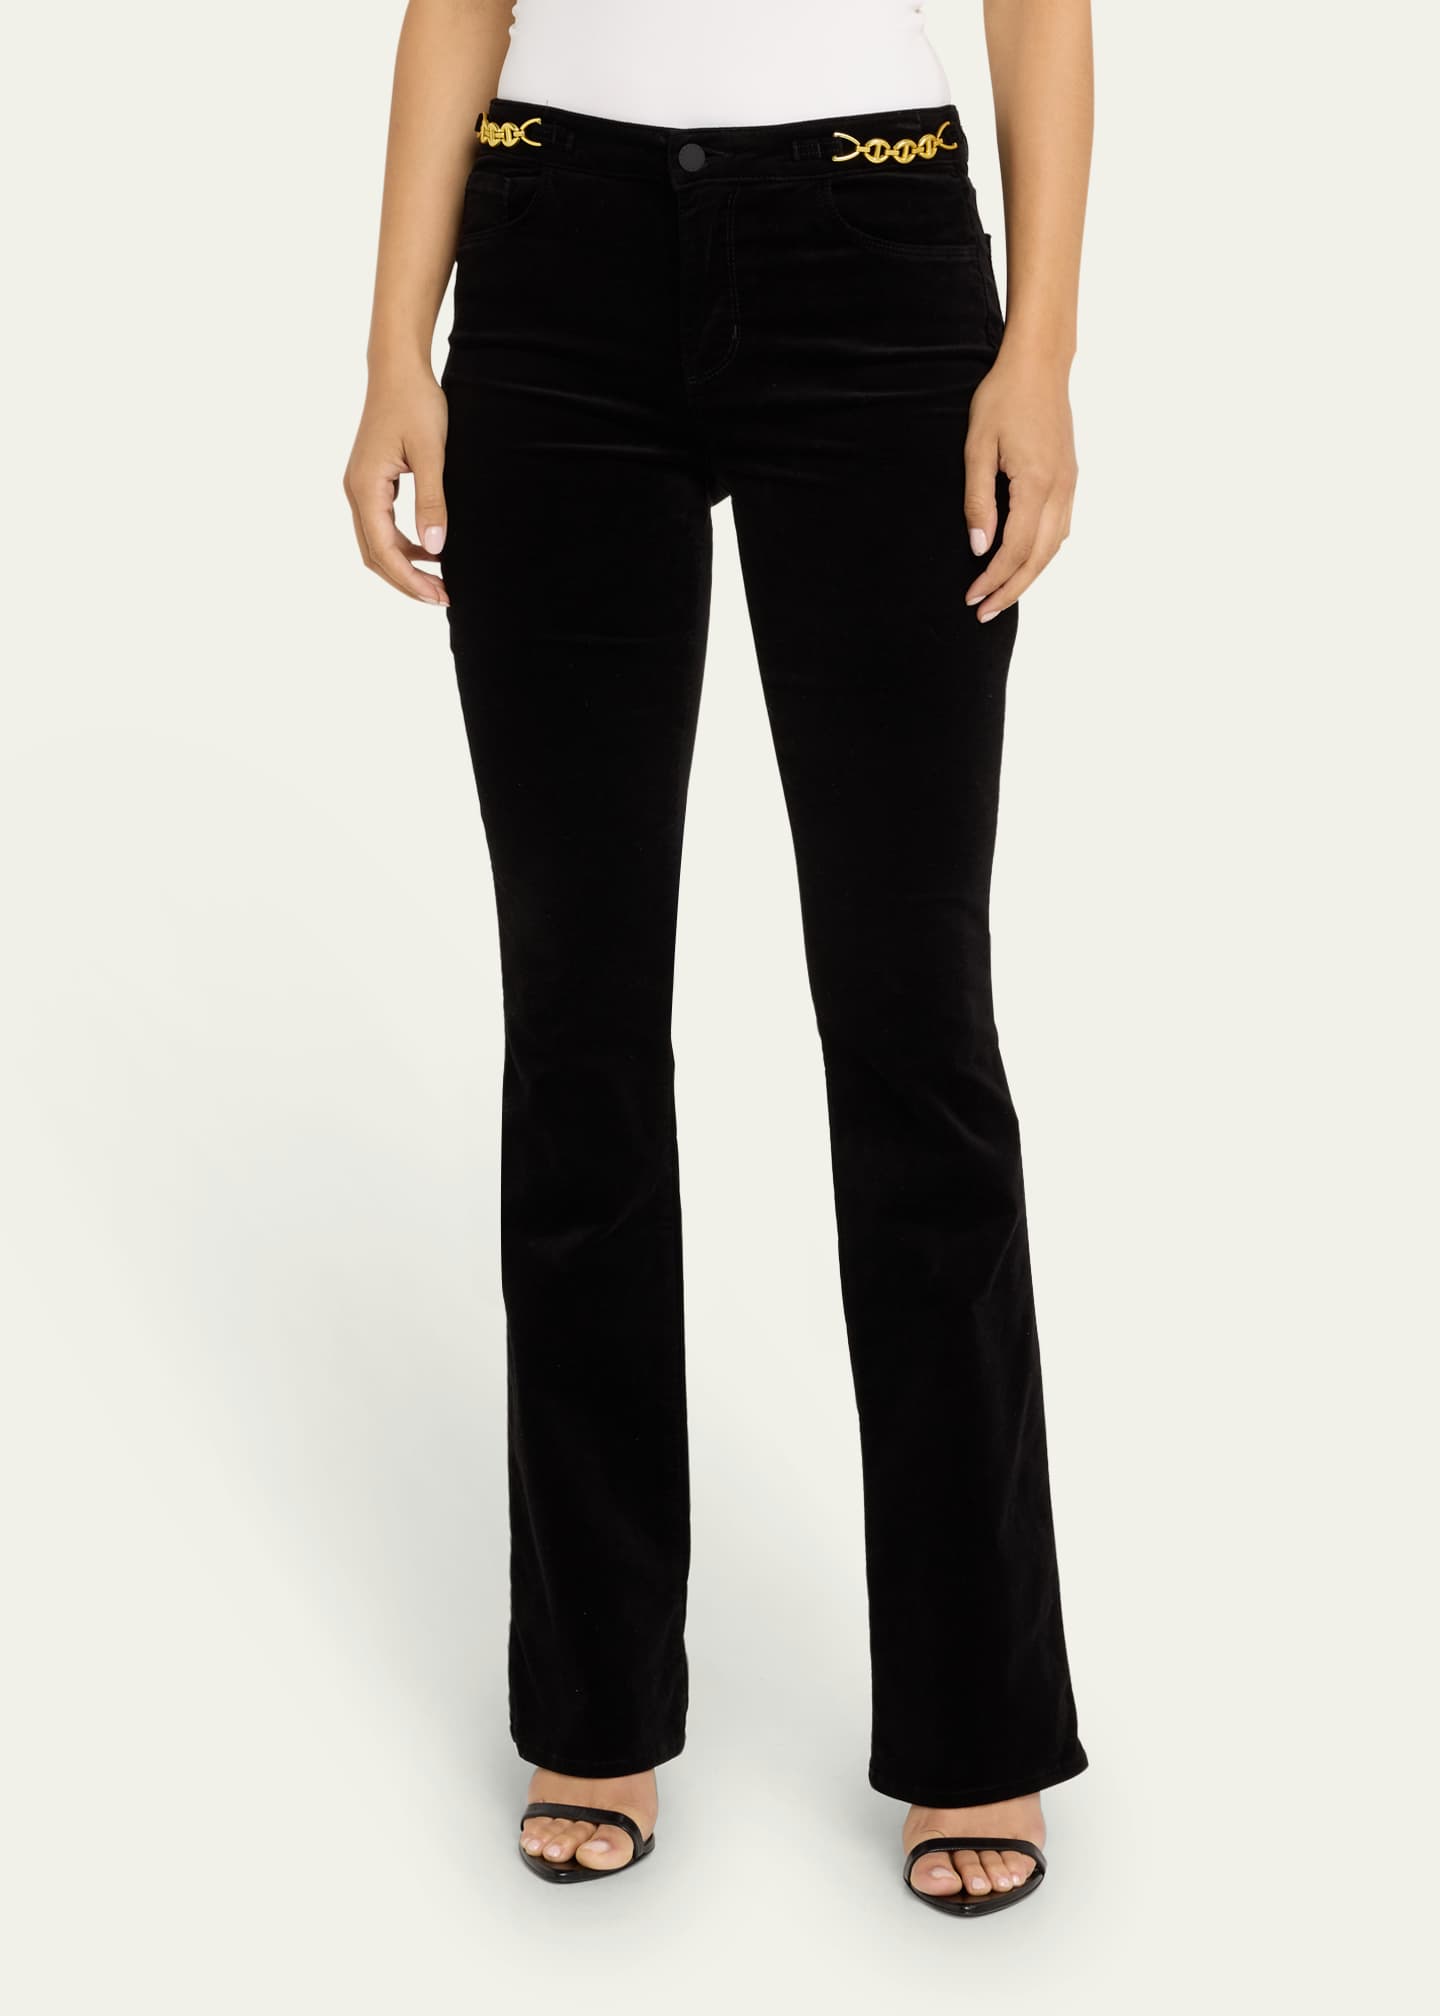 L'Agence Stevie High Rise Straight Gold Chain Jeans - Bergdorf Goodman